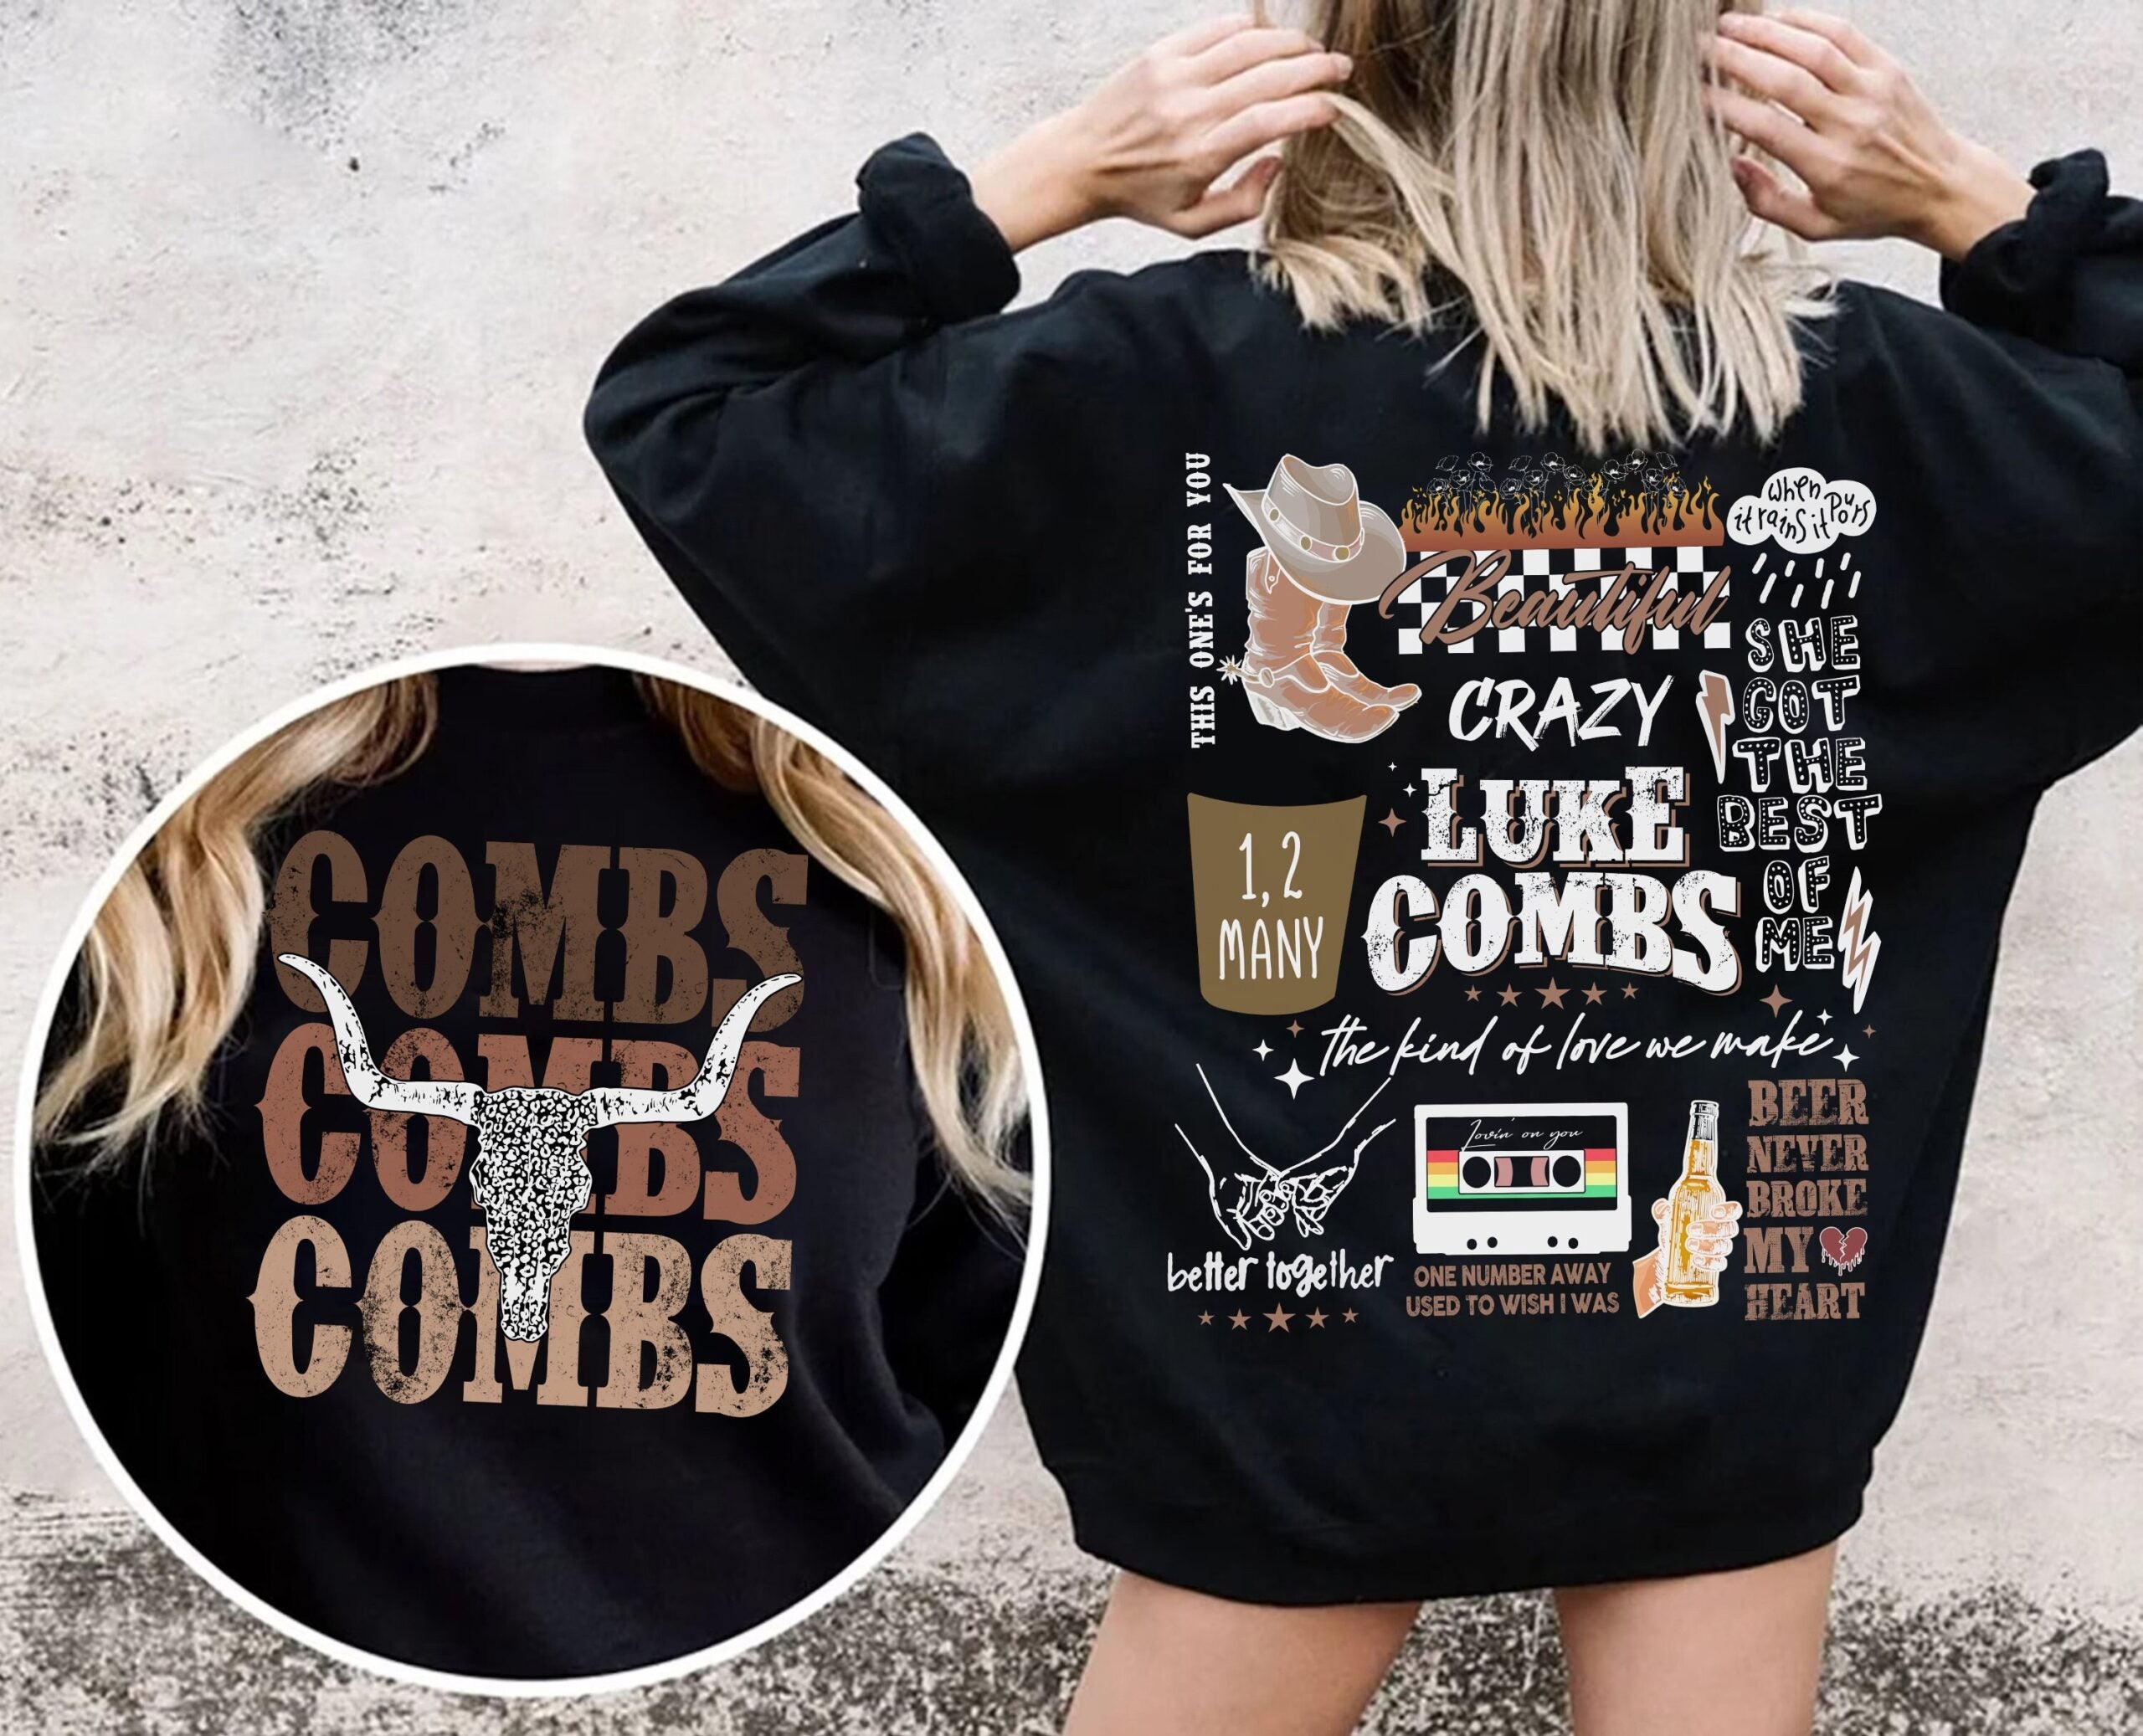 Are Luke Combs Shirts Made Of Comfortable Fabric?